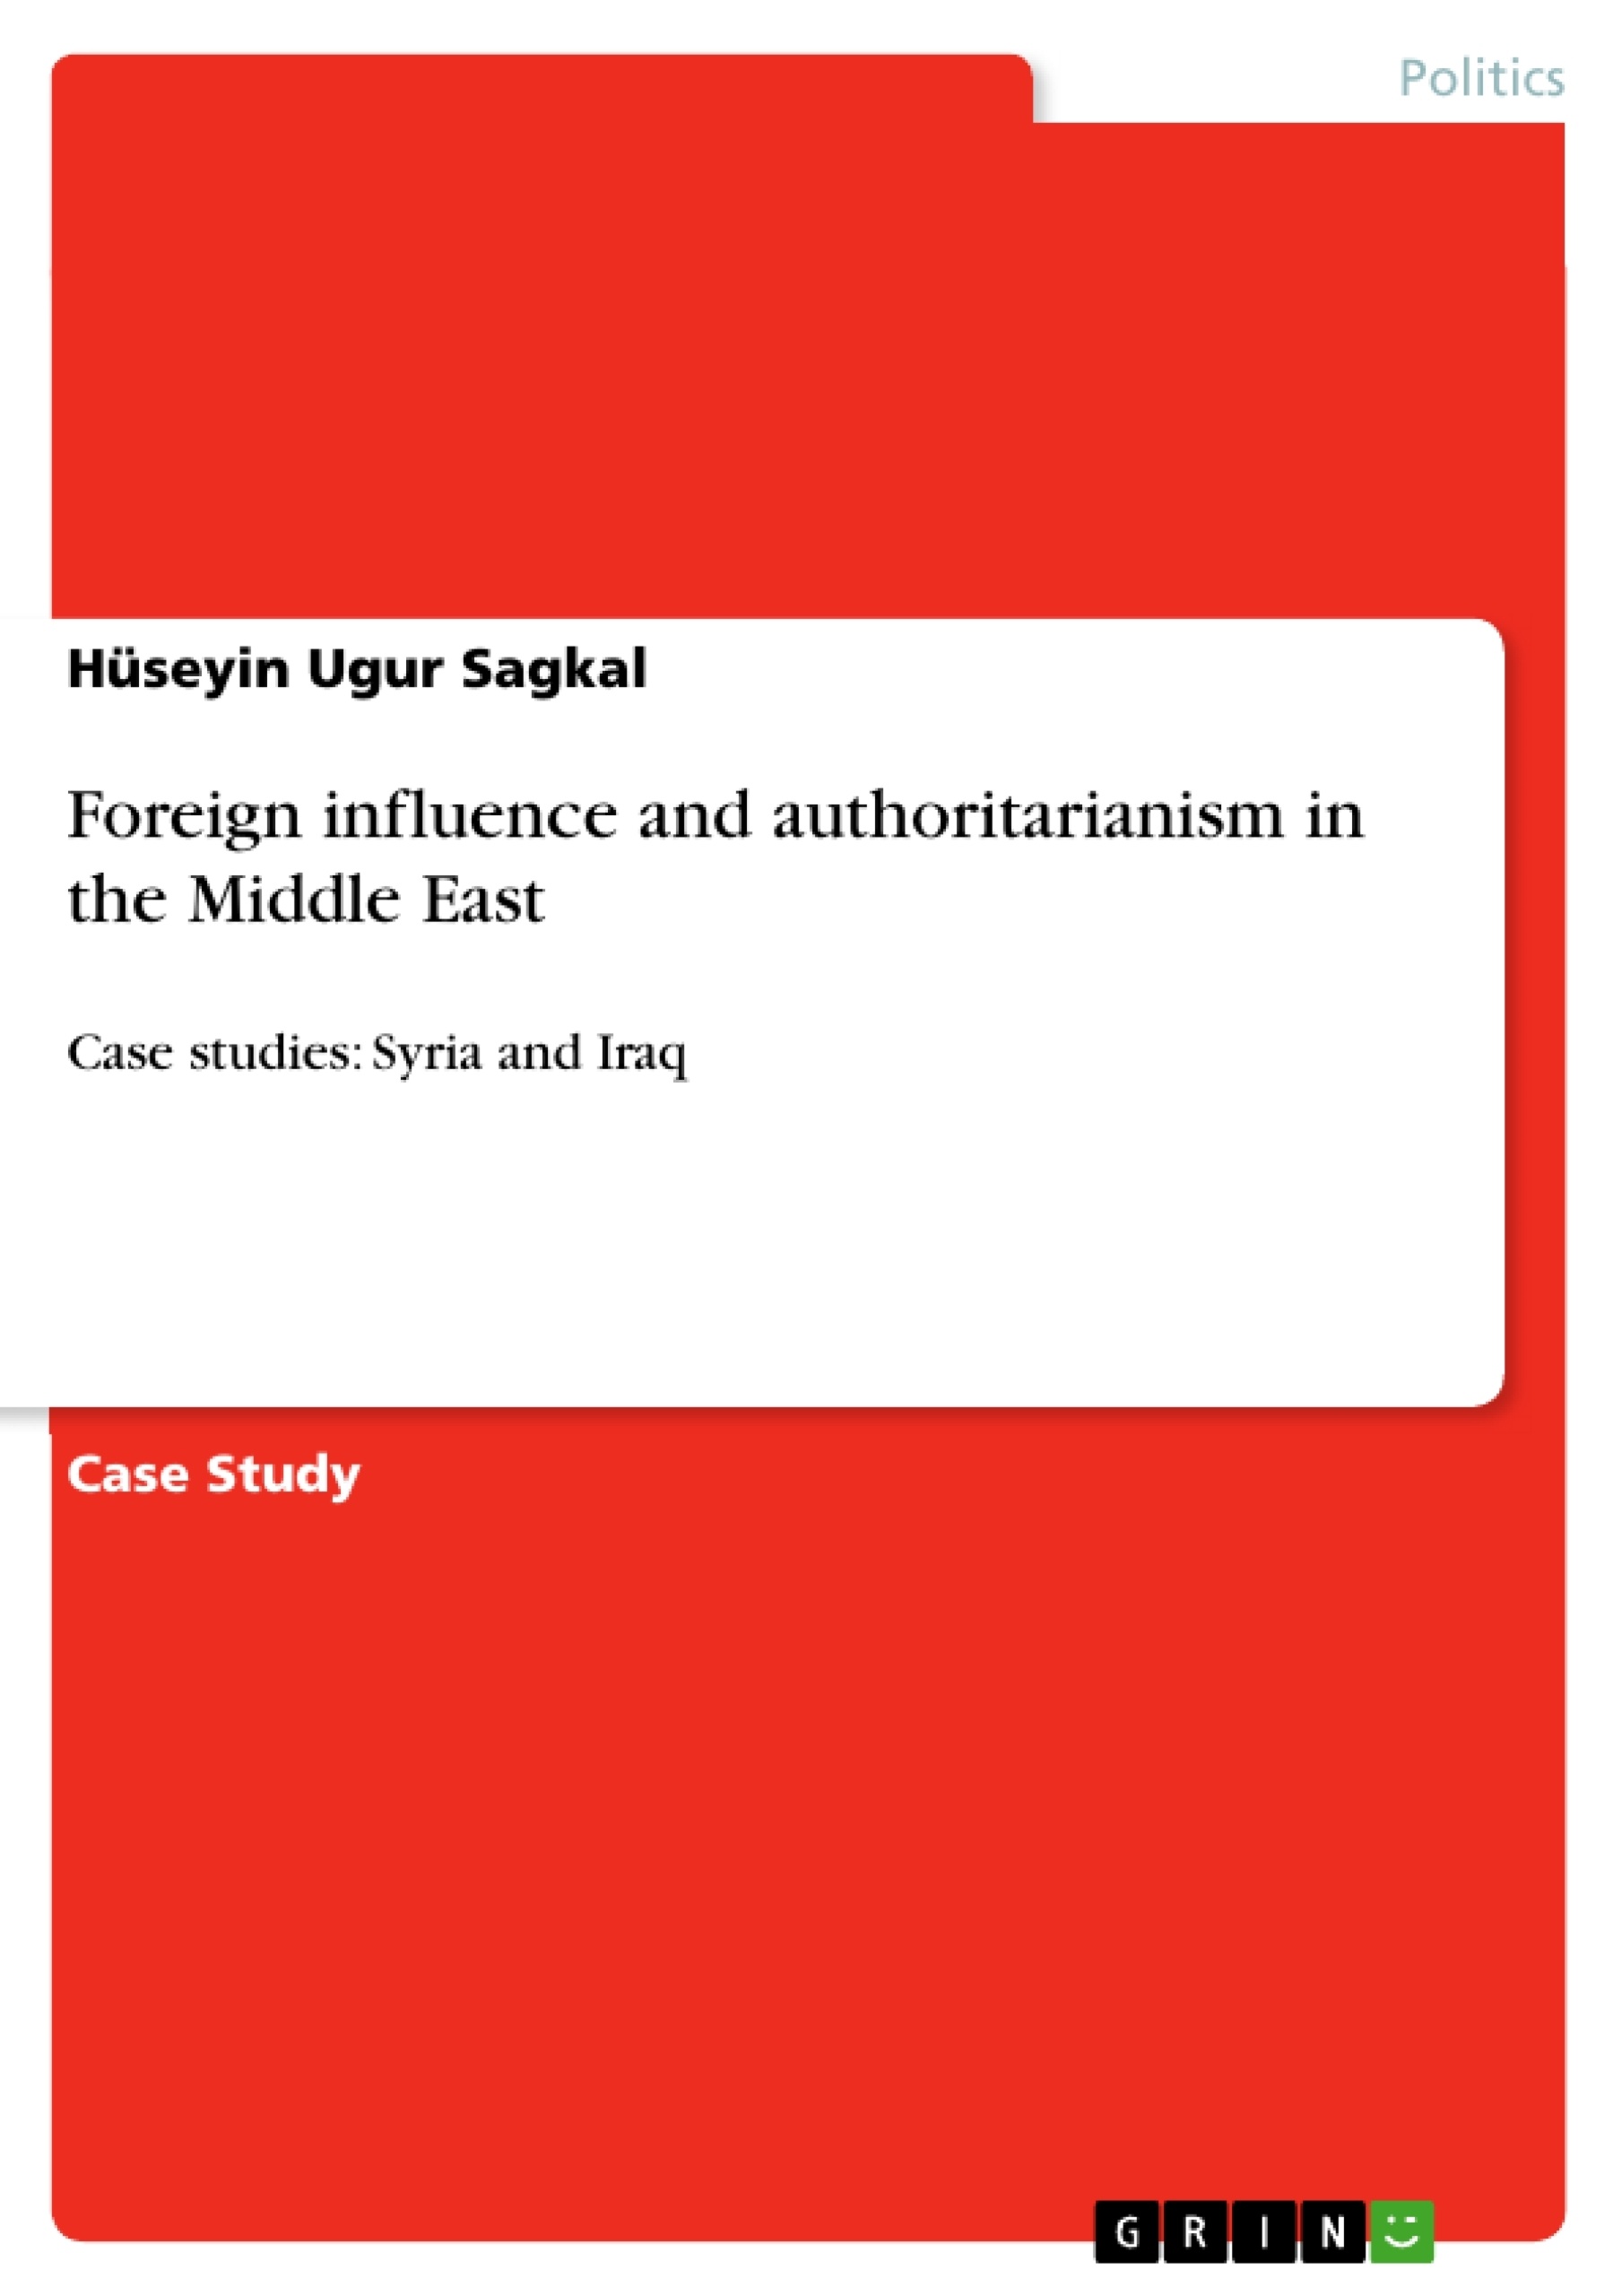 Title: Foreign influence and authoritarianism in the Middle East